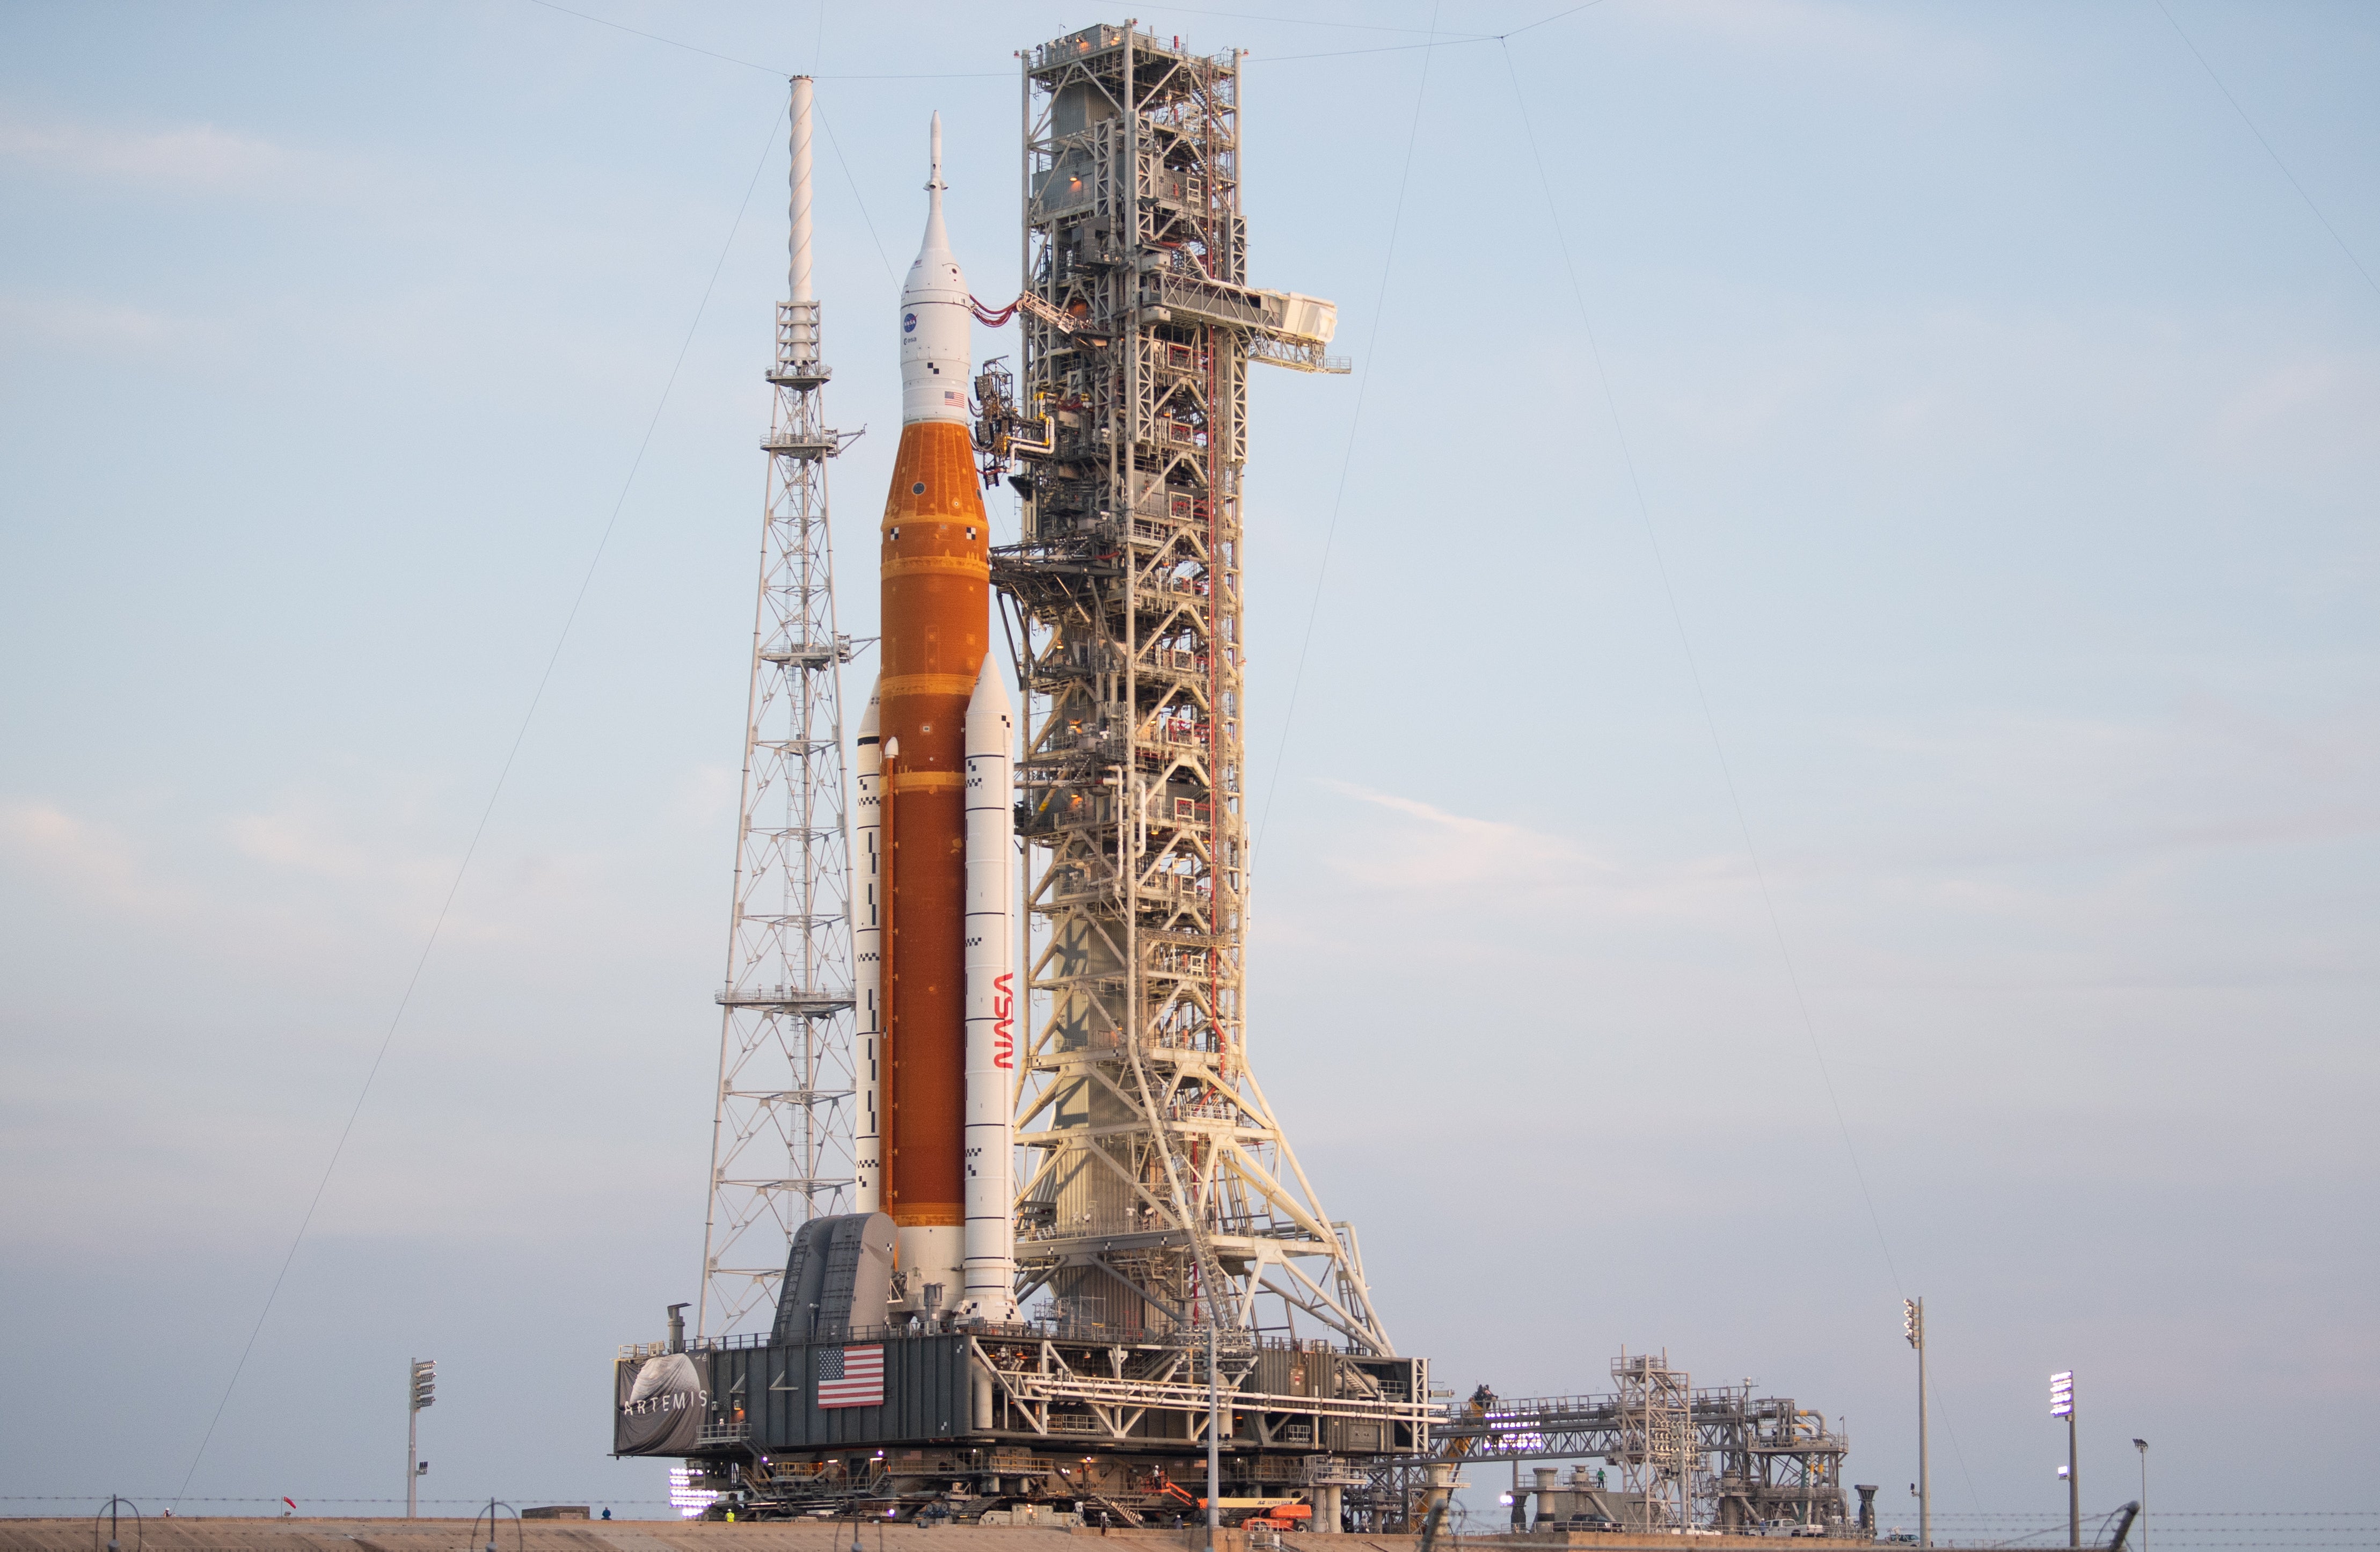 NASA's Giant SLS Rocket Rolls to Launchpad for Artemis 1 Moon Mission -  Scientific American